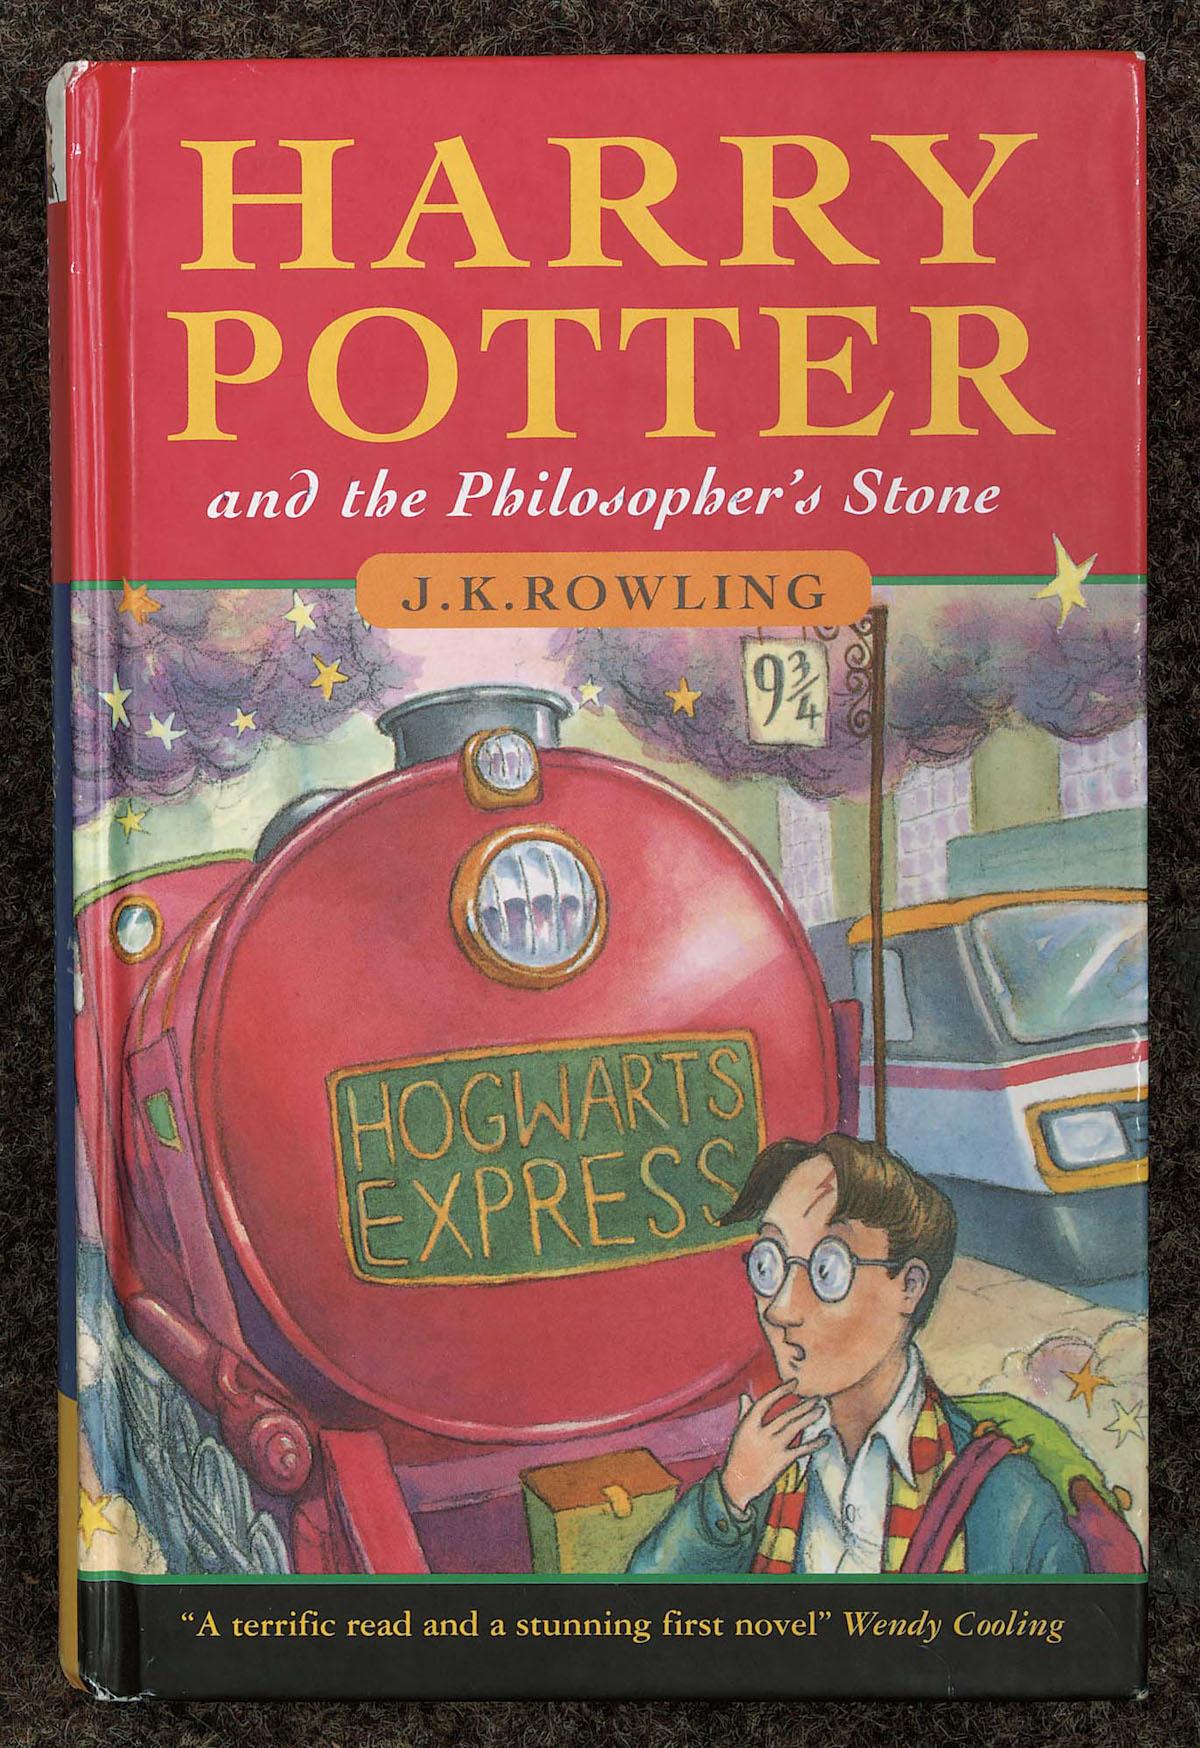 The cover of J.K. Rowling's first novel "Harry Potter and the Philosopher's Stone." (Christie's/Getty Images)